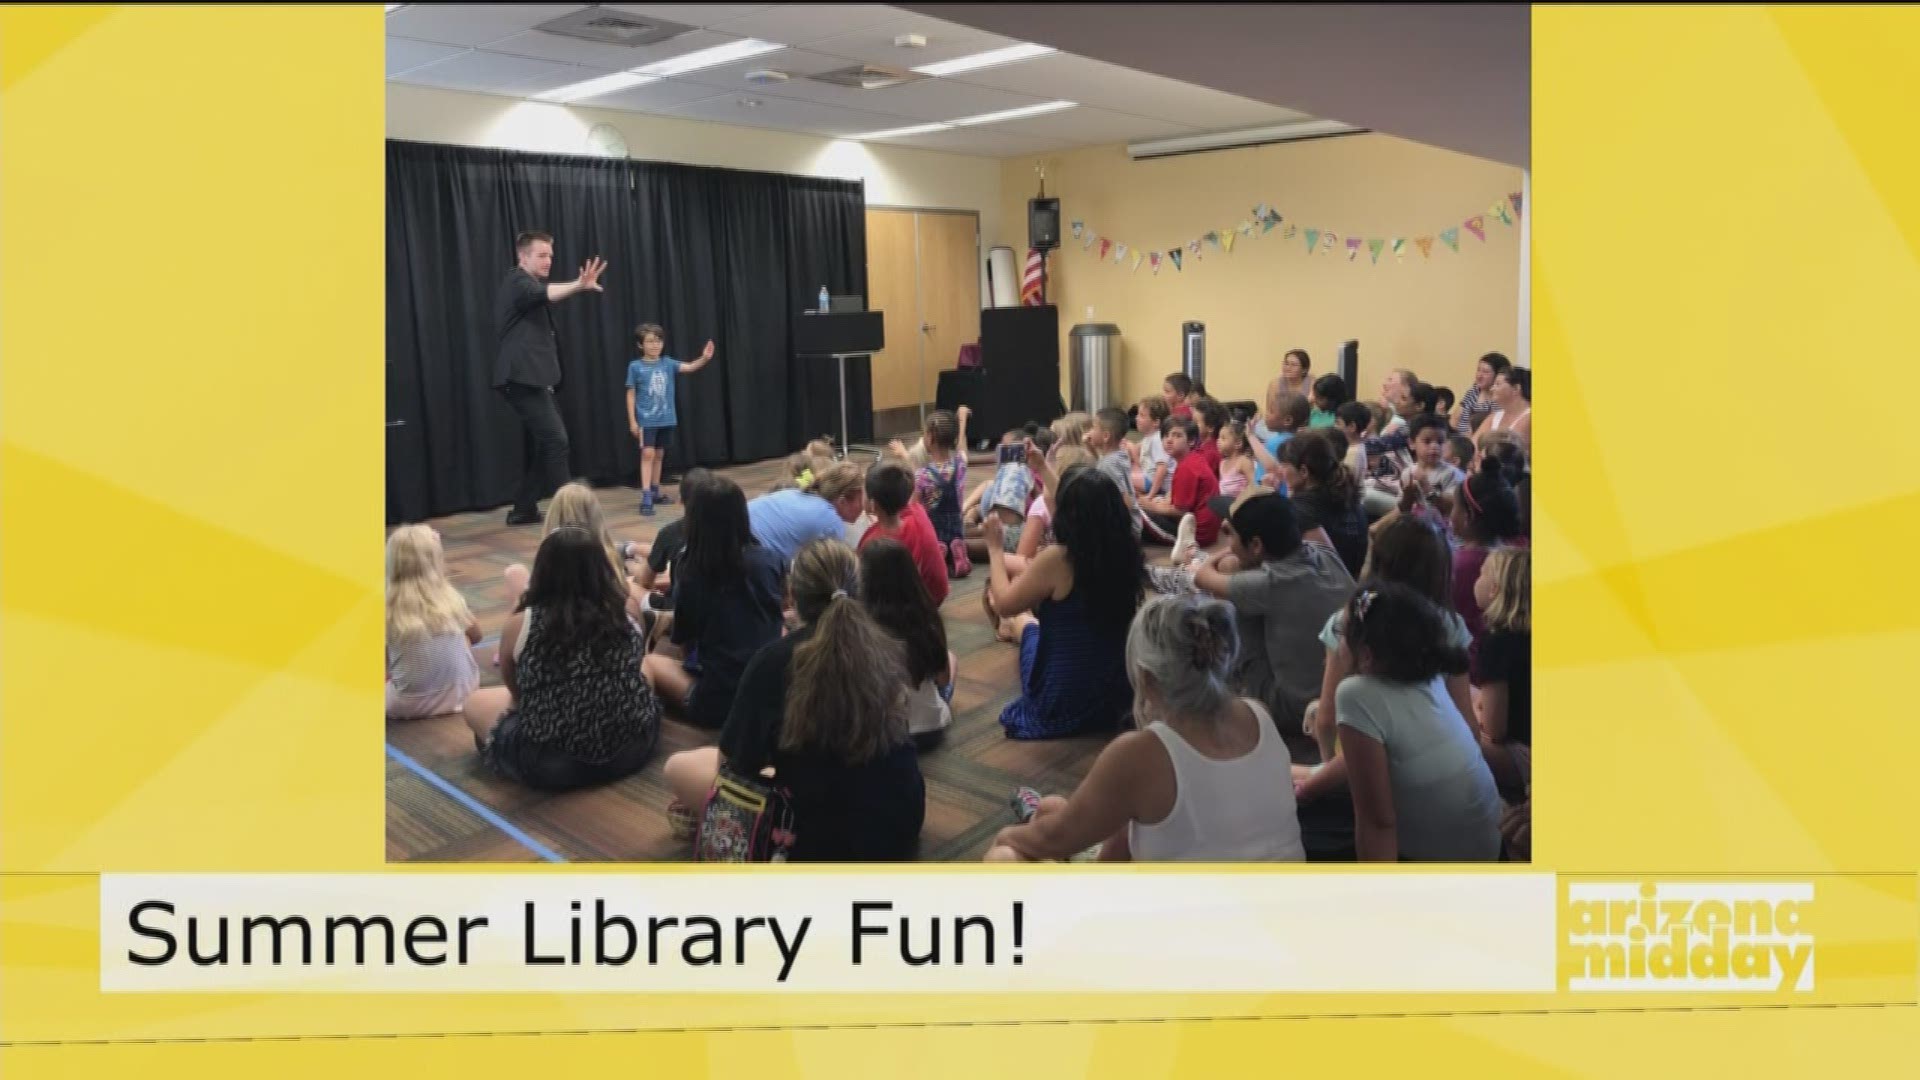 Chickens, gardening, reading and more! Lee Franklin takes us through the hottest library programs this summer.